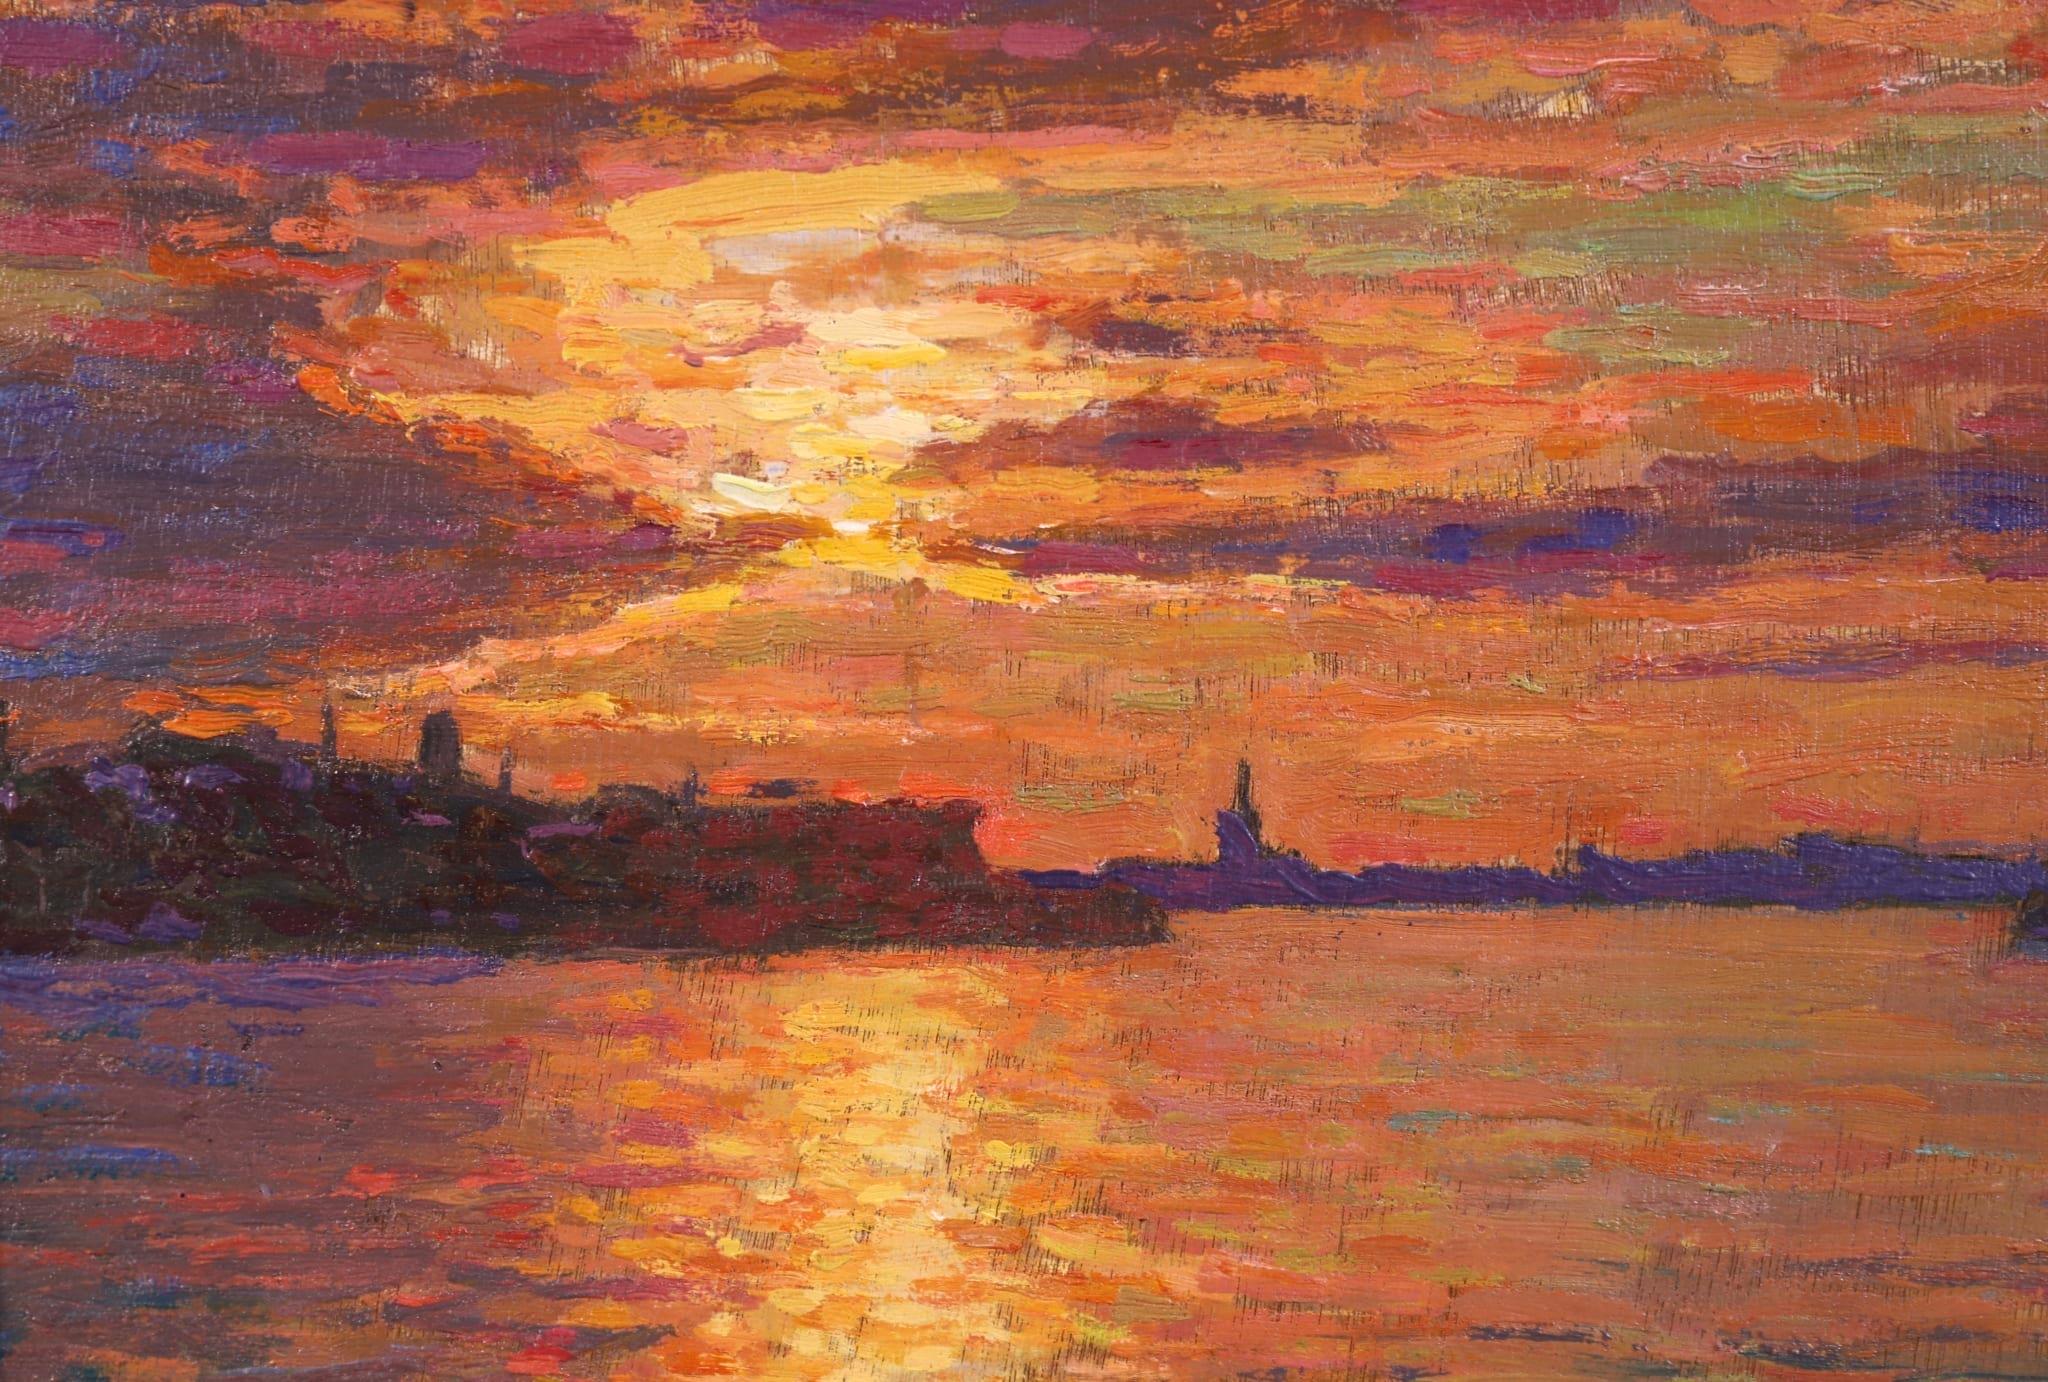 Sunset - Amsterdam - Post Impressionist Oil, Seascape - Jacques Martin-Ferrieres - Post-Impressionist Painting by Jacques Martin-Ferrières